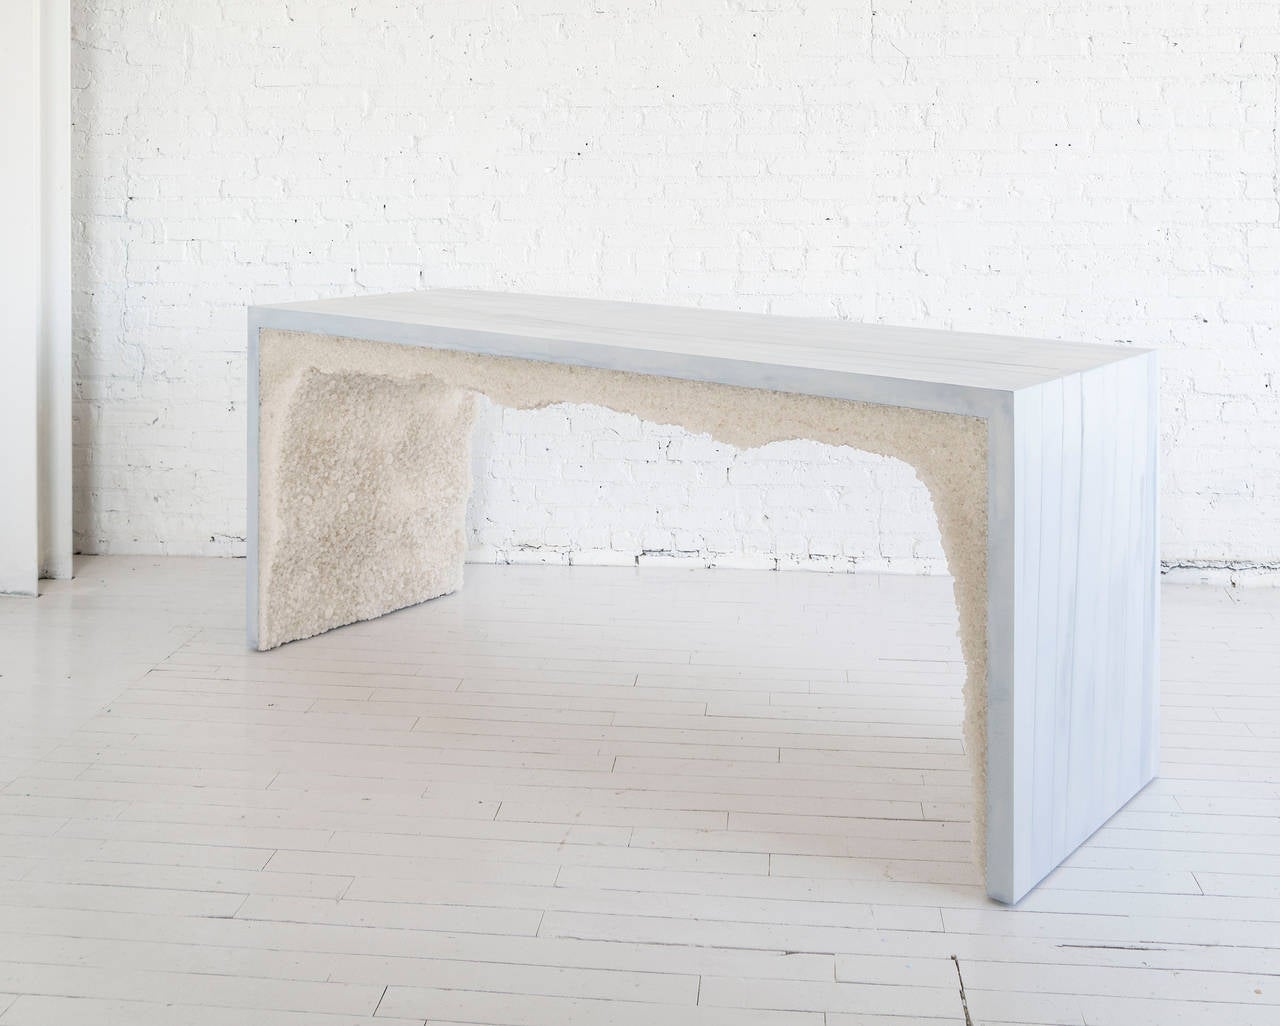 This made-to-order console consists of a hand-dyed ice blue cement exterior and a white rock salt interior. The rock salt is packed by hand within the cement in an organic nature. 8-10 weeks lead time.
Custom options available, please inquire with